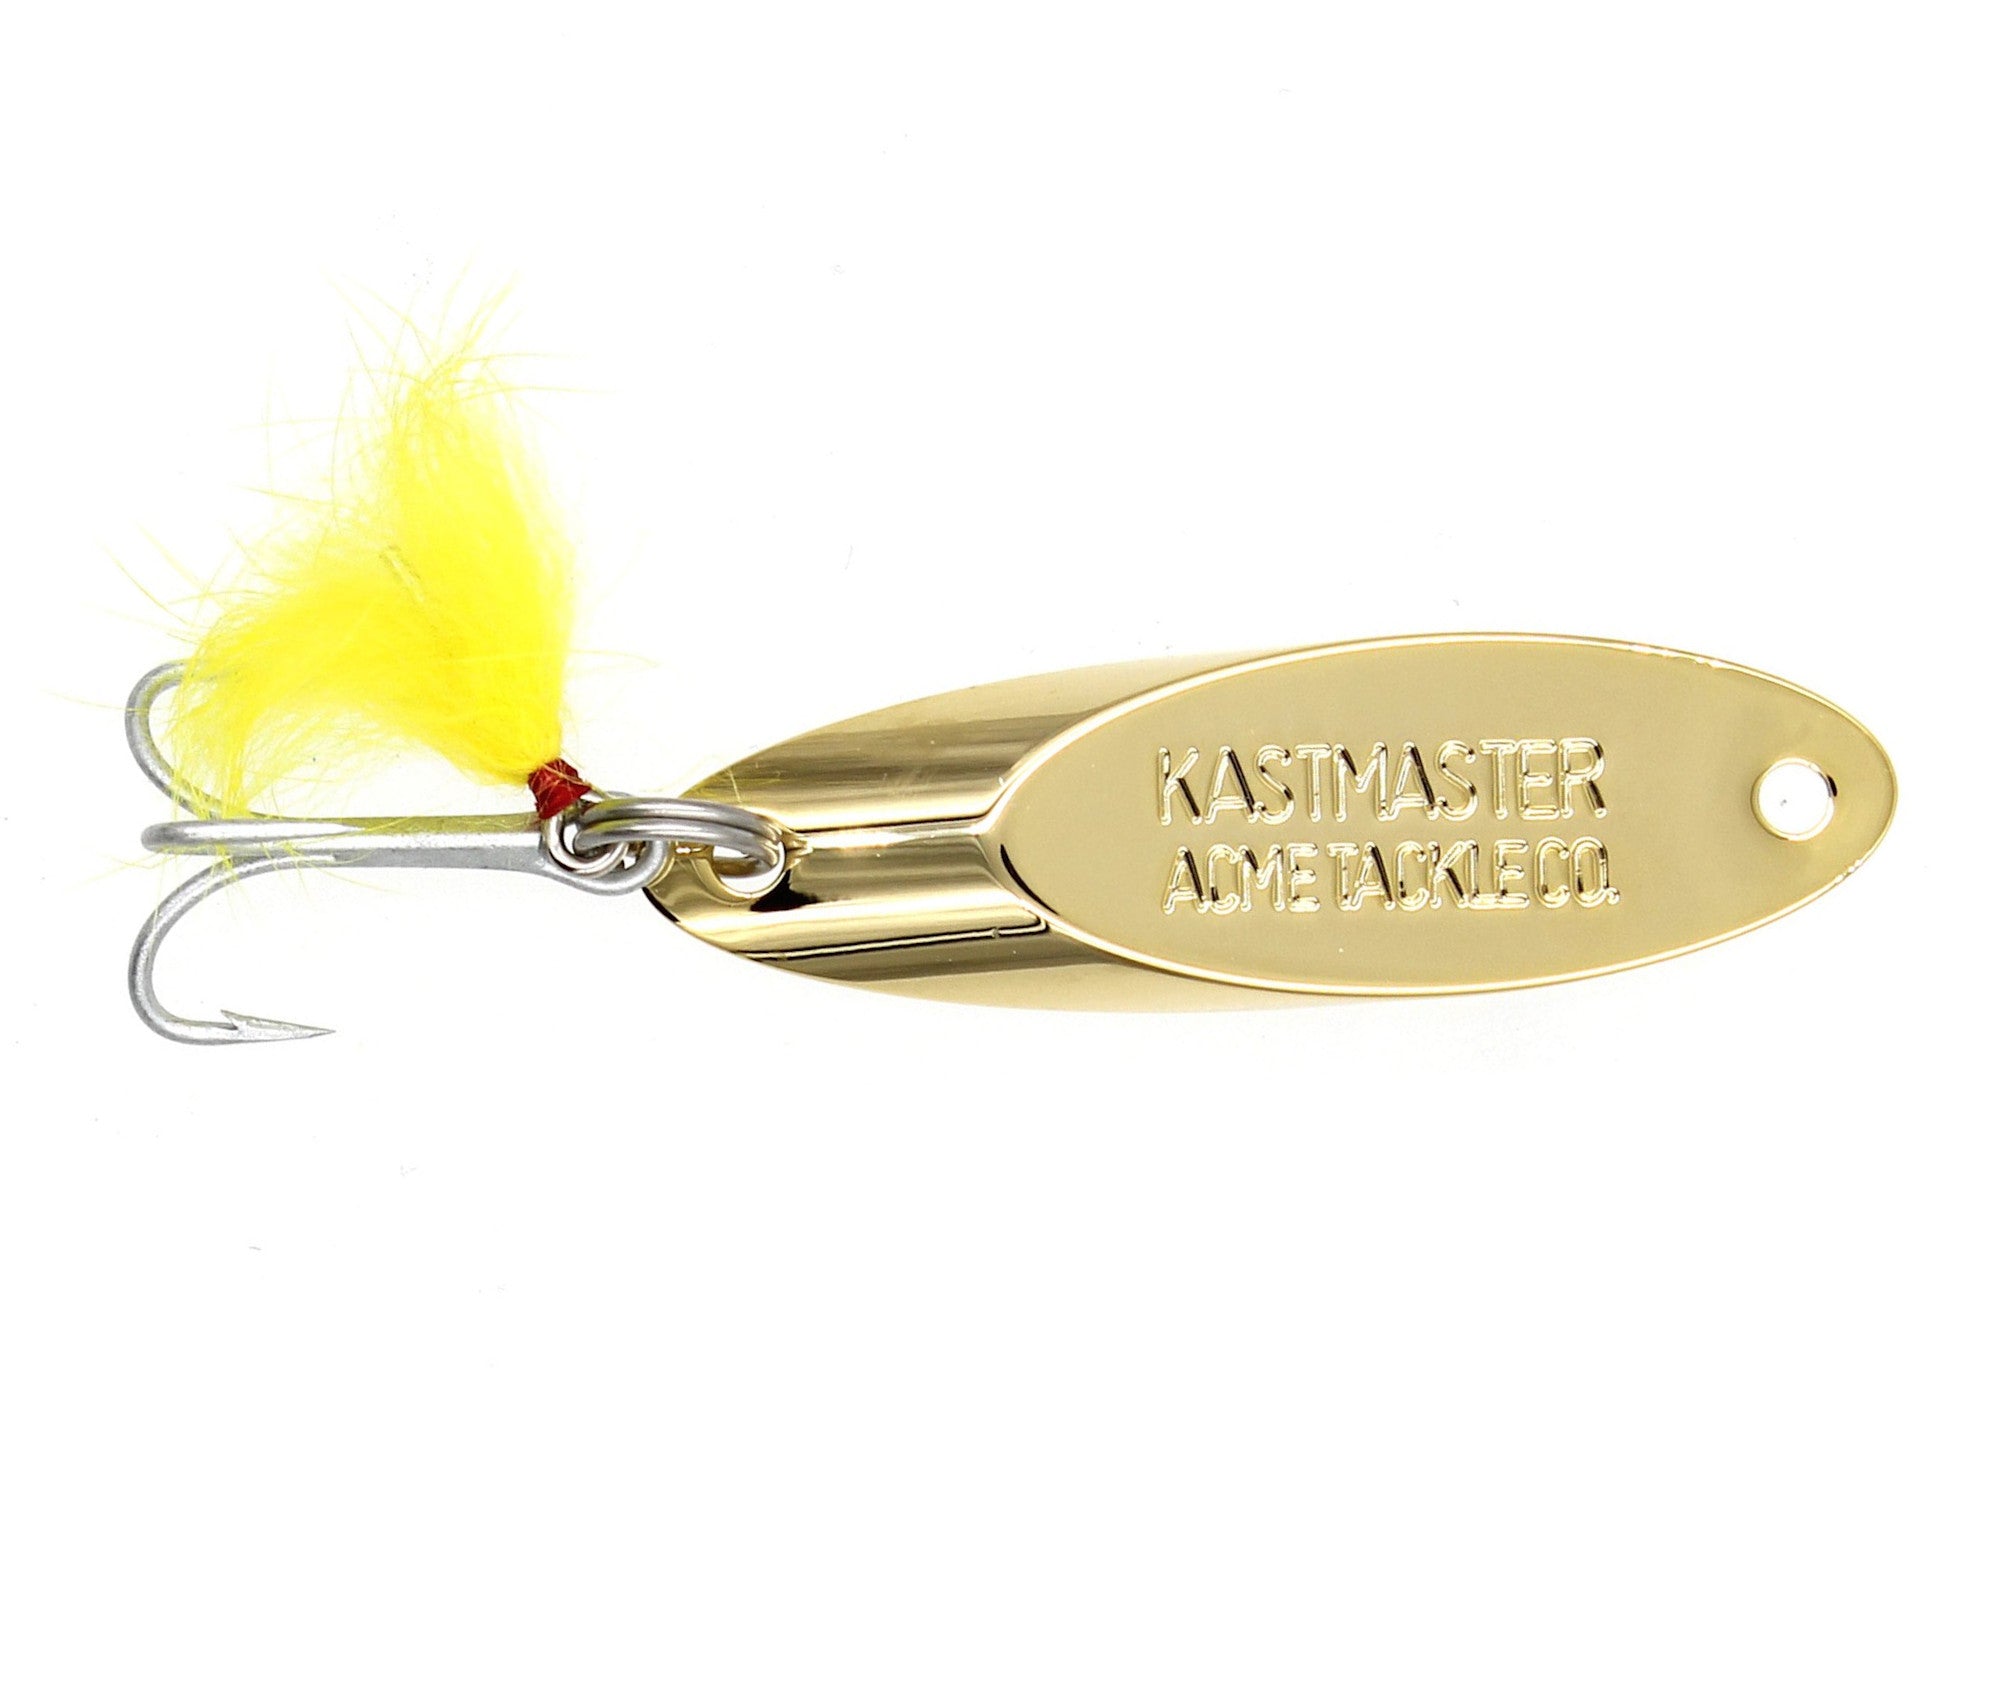 Acme Trout Spoon Multi Pack 1/4oz Painted 3 Pack